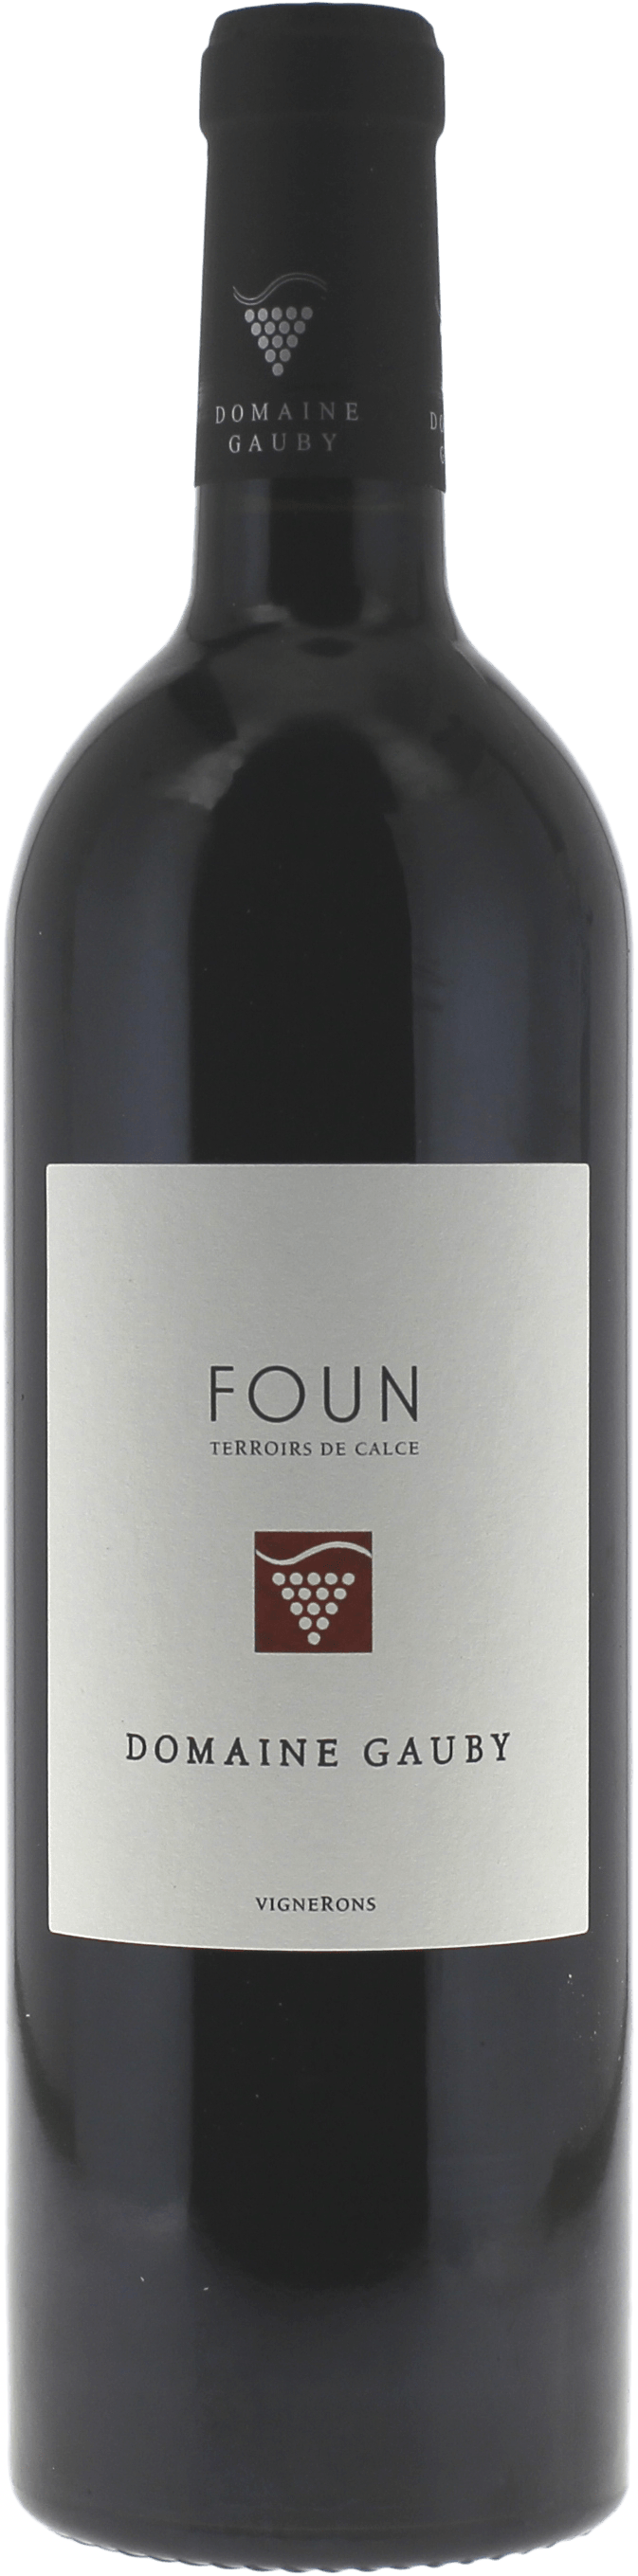 Gauby foun rouge 2018  IGP Ctes catalanes, Roussillon